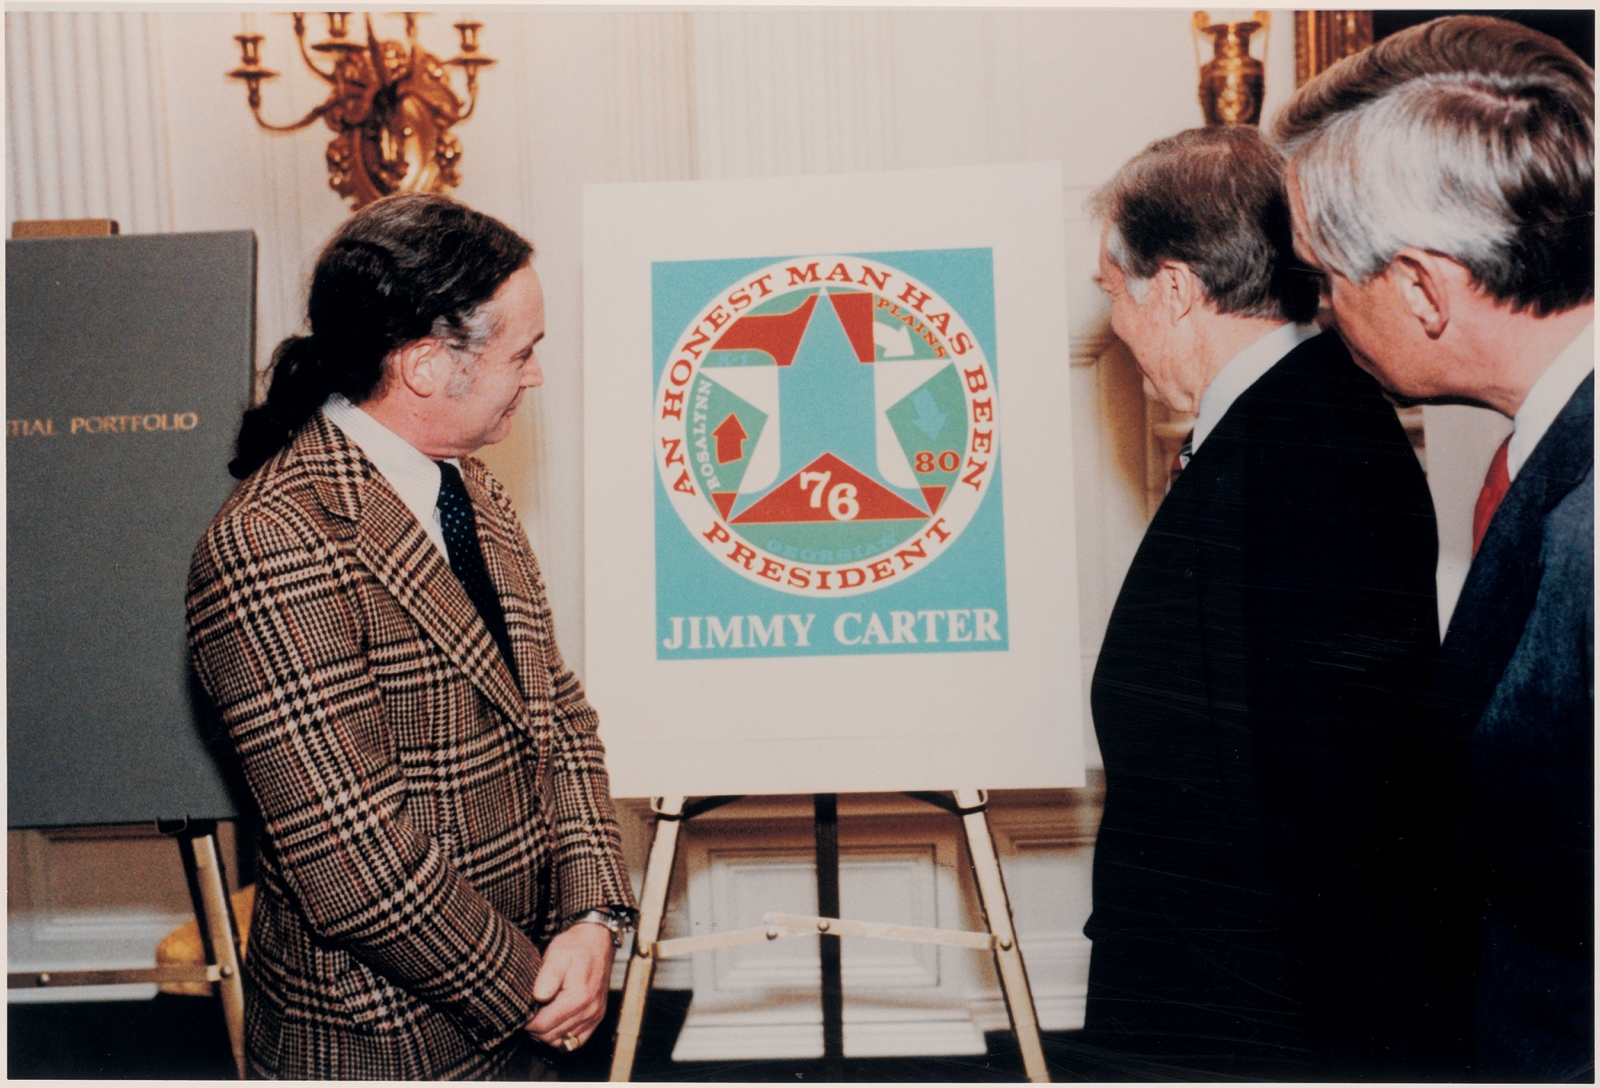 Indiana, left, presenting his serigraph&amp;nbsp;An Honest Man Has Been President, to President Jimmy Carter and Vice President Walter Mondale, The White House, Washington, D.C., January 1981. Image courtesy of The Star of Hope, Vinalhaven, Maine